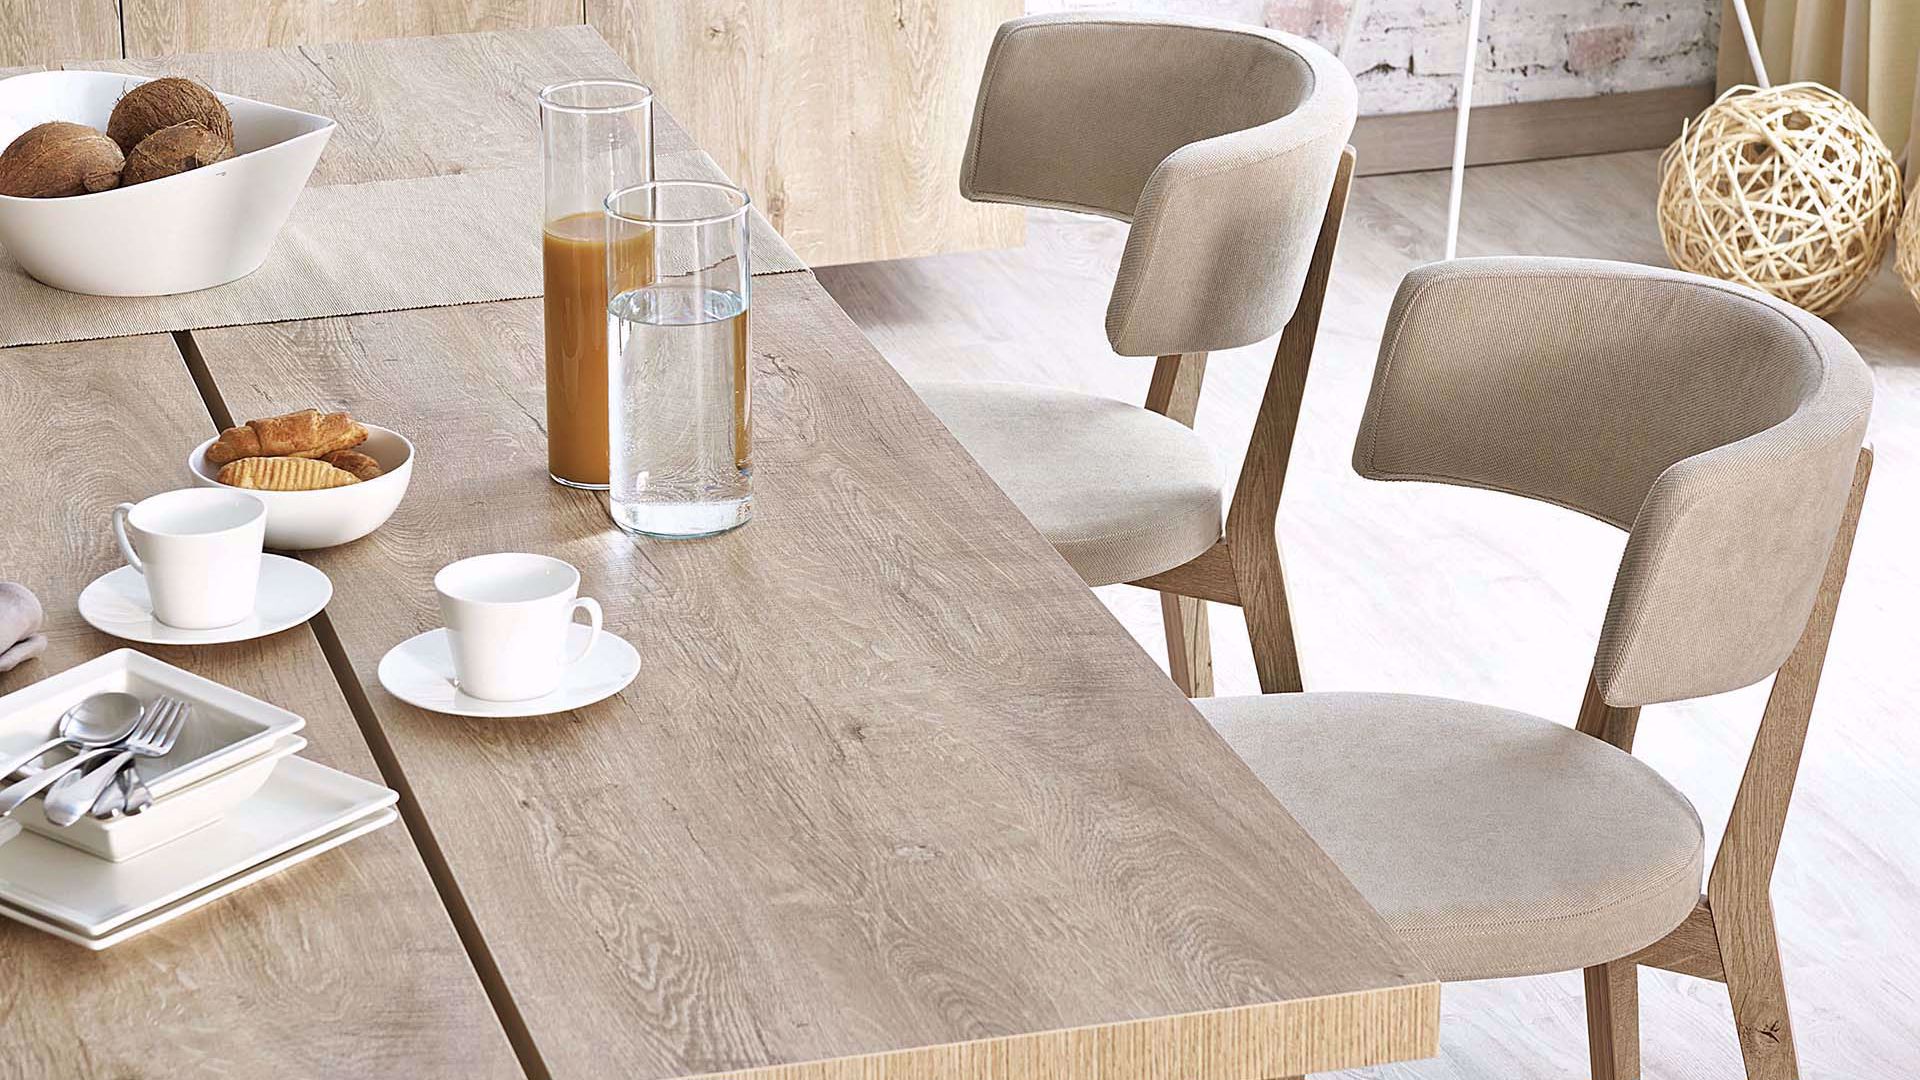 Redoro Fixed Dining Table (220*100 Cm)